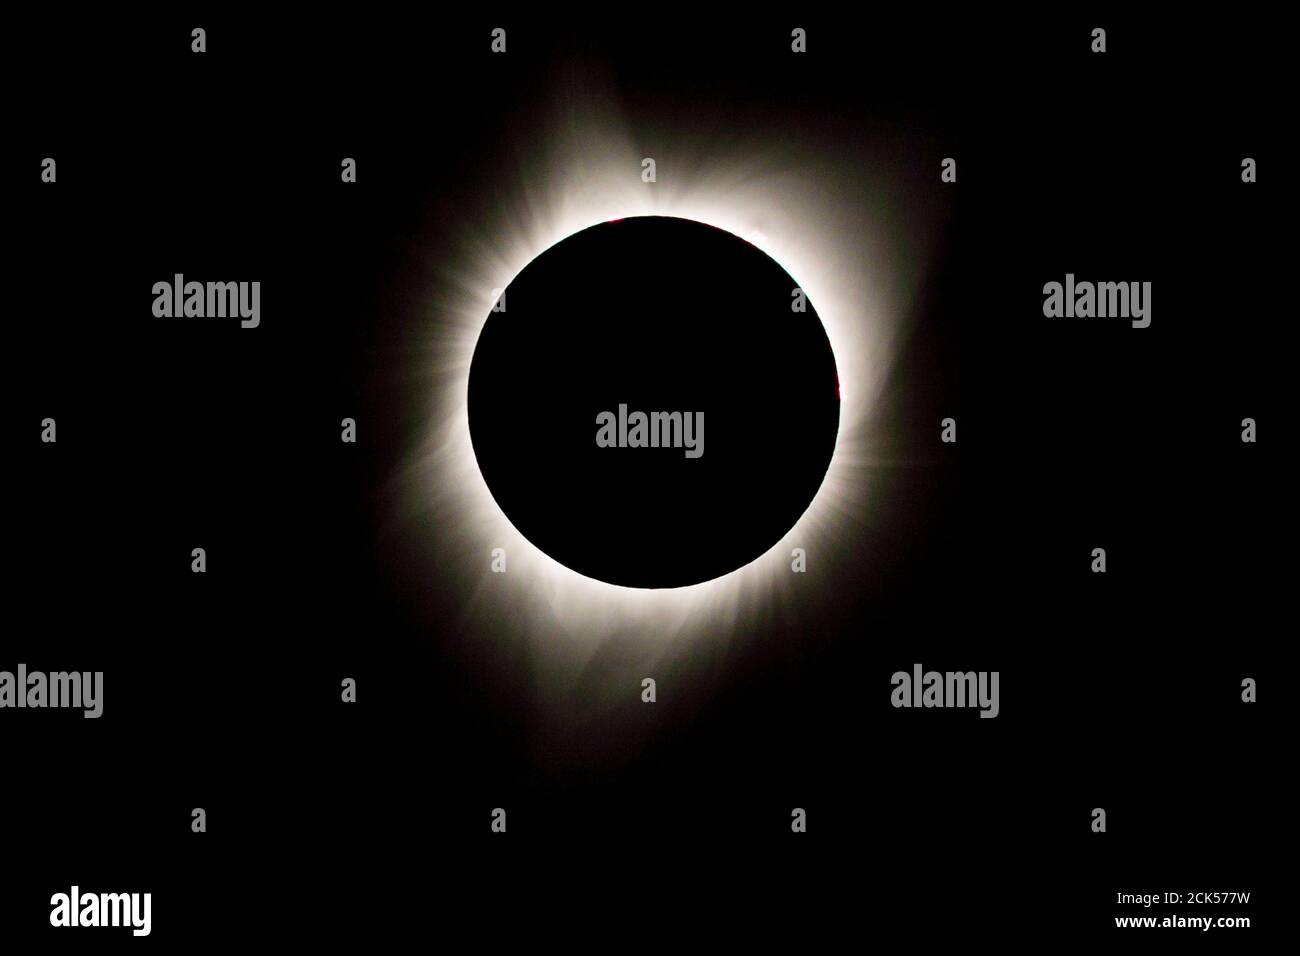 The sun's corona envelops the moon in this total solar eclipse viewed from Oregon, USA. Stock Photo